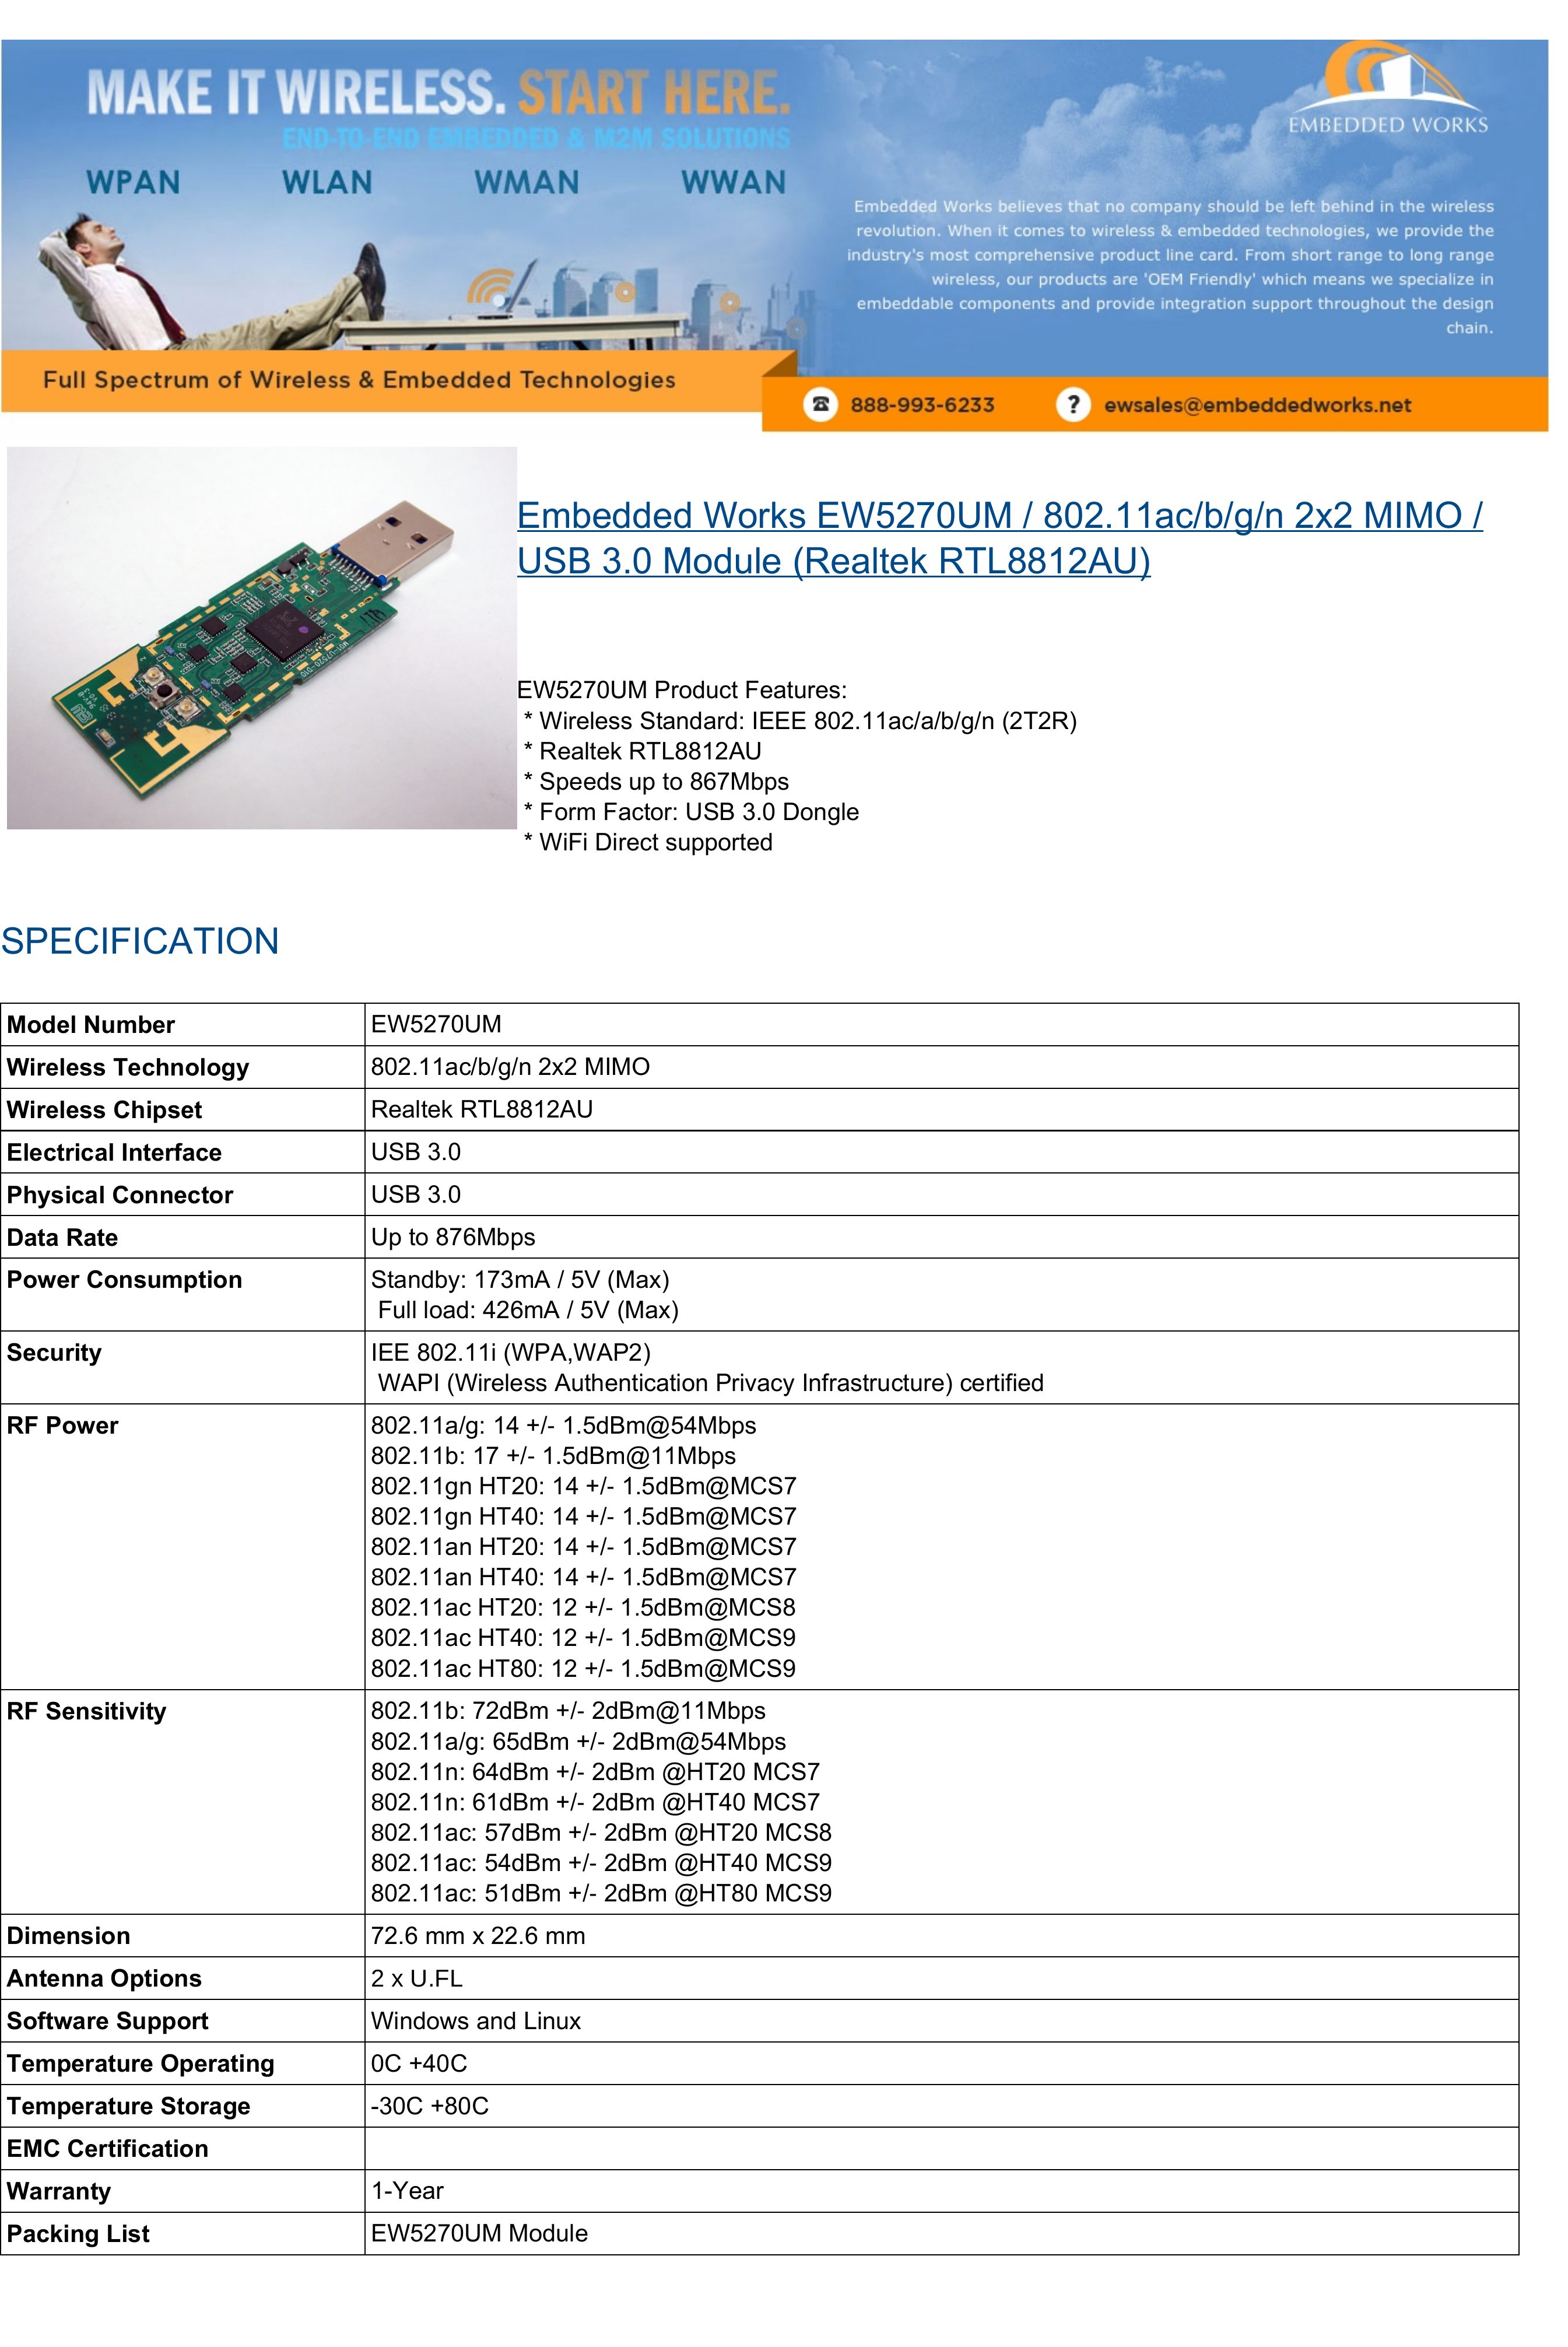   Embedded Works EW5270UM / 802.11ac/b/g/n 2x2 MIMO /USB 3.0 Module (Realtek RTL8812AU)EW5270UM Product Features: * Wireless Standard: IEEE 802.11ac/a/b/g/n (2T2R) * Realtek RTL8812AU * Speeds up to 867Mbps * Form Factor: USB 3.0 Dongle * WiFi Direct supportedSPECIFICATIONModel Number EW5270UMWireless Technology 802.11ac/b/g/n 2x2 MIMOWireless Chipset Realtek RTL8812AUElectrical Interface USB 3.0Physical Connector USB 3.0Data Rate Up to 876MbpsPower Consumption Standby: 173mA / 5V (Max) Full load: 426mA / 5V (Max)Security IEE 802.11i (WPA,WAP2) WAPI (Wireless Authentication Privacy Infrastructure) certifiedRF Power 802.11a/g: 14 +/ 1.5dBm@54Mbps802.11b: 17 +/ 1.5dBm@11Mbps802.11gn HT20: 14 +/ 1.5dBm@MCS7802.11gn HT40: 14 +/ 1.5dBm@MCS7802.11an HT20: 14 +/ 1.5dBm@MCS702.11an HT40: 14 +/ 1.5dBm@MCS7802.11ac HT20: 12 +/ 1.5dBm@MCS8802.11ac HT40: 12 +/ 1.5dBm@MCS9802.11ac HT80: 12 +/ 1.5dBm@MCS9RF Sensitivity 802.11b: 72dBm +/ 2dBm@11Mbps802.11a/g: 65dBm +/ 2dBm@54Mbps802.11n: 64dBm +/ 2dBm @HT20 MCS702.11n: 61dBm +/ 2dBm @HT40 MCS702.11ac: 57dBm +/ 2dBm @HT20 MCS8802.11ac: 54dBm +/ 2dBm @HT40 MCS9802.11ac: 51dBm +/ 2dBm @HT80 MCS9Dimension 72.6 mm x 22.6 mmAntenna Options[8)/Software Support Windows and LinuxTemperature Operating 0C +40CTemperature Storage -30C +80CEMC CertificationWarranty 1-YearPacking List EW5270UM Module